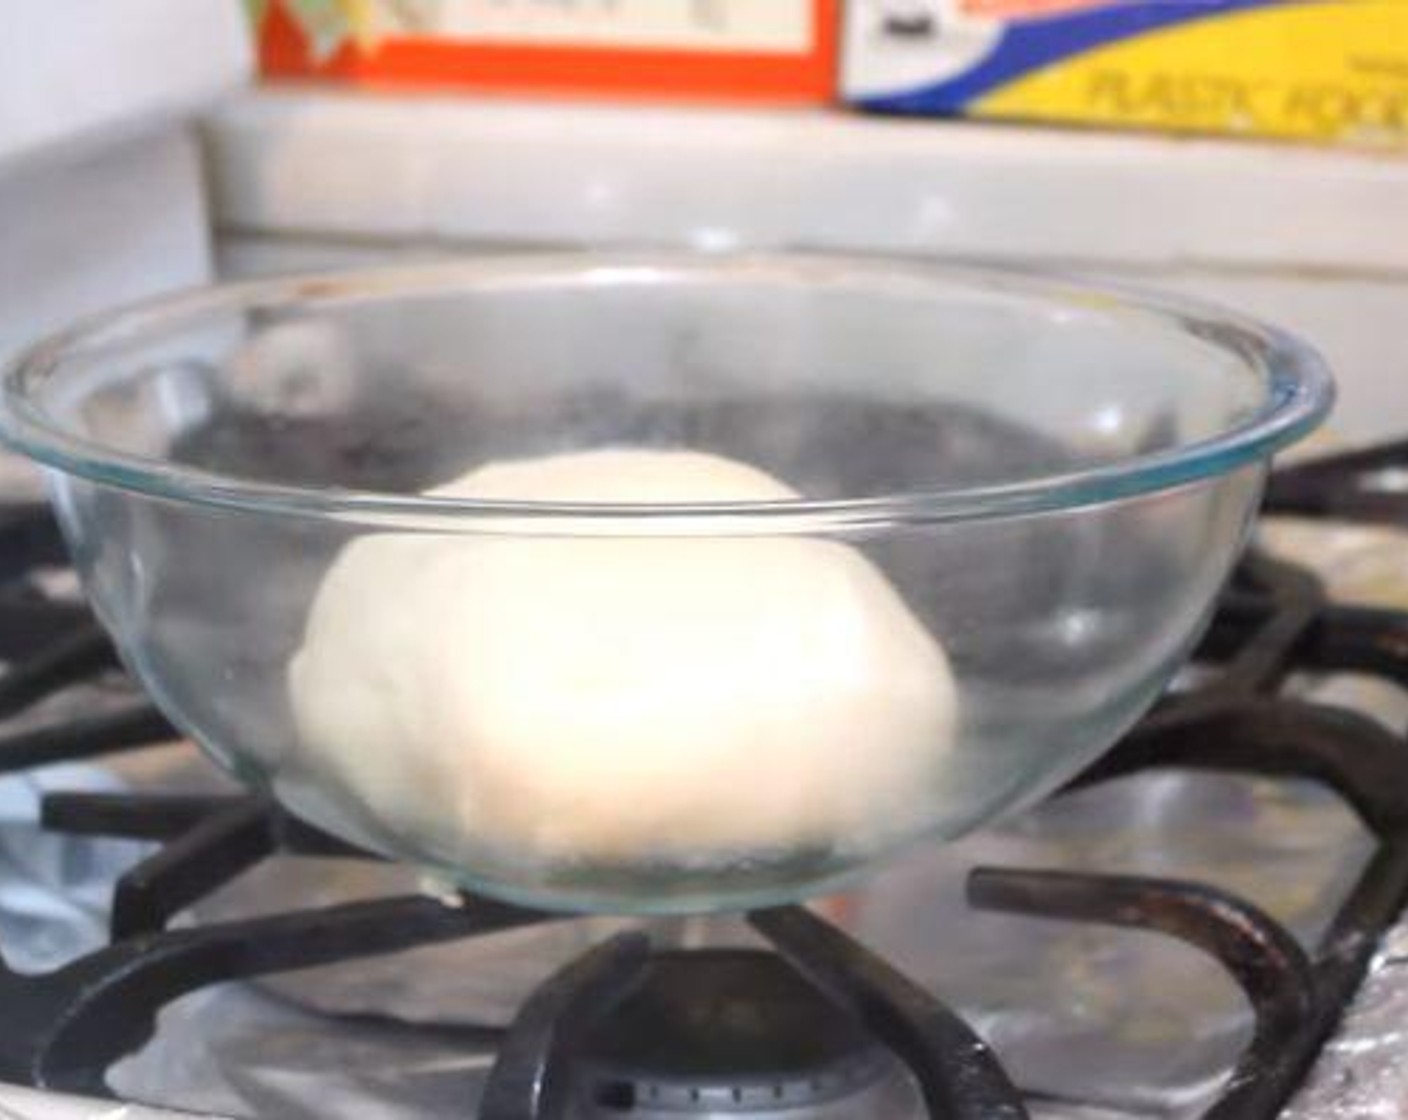 step 3 In the bowl of a stand mixer, add the dry and wet ingredients. Knead the dough until nice and smooth. Grease a bowl and add the ball of dough. Spray the top of the ball as well. Cover with plastic wrap and let sit in a warm place for 1 1/2 hours